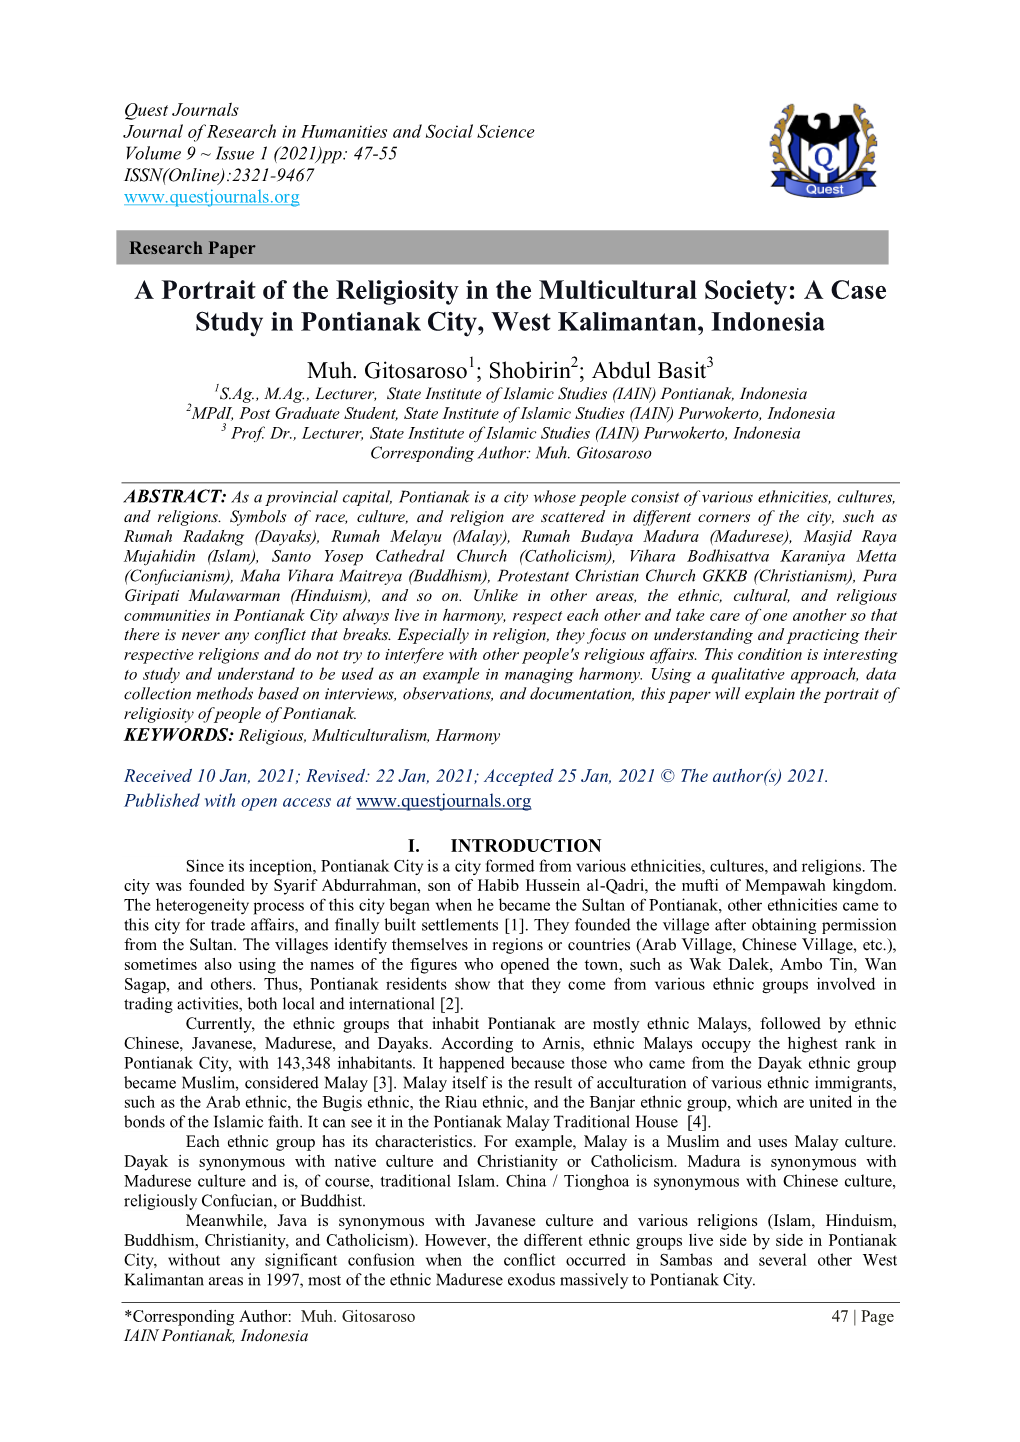 A Portrait of the Religiosity in the Multicultural Society: a Case Study in Pontianak City, West Kalimantan, Indonesia